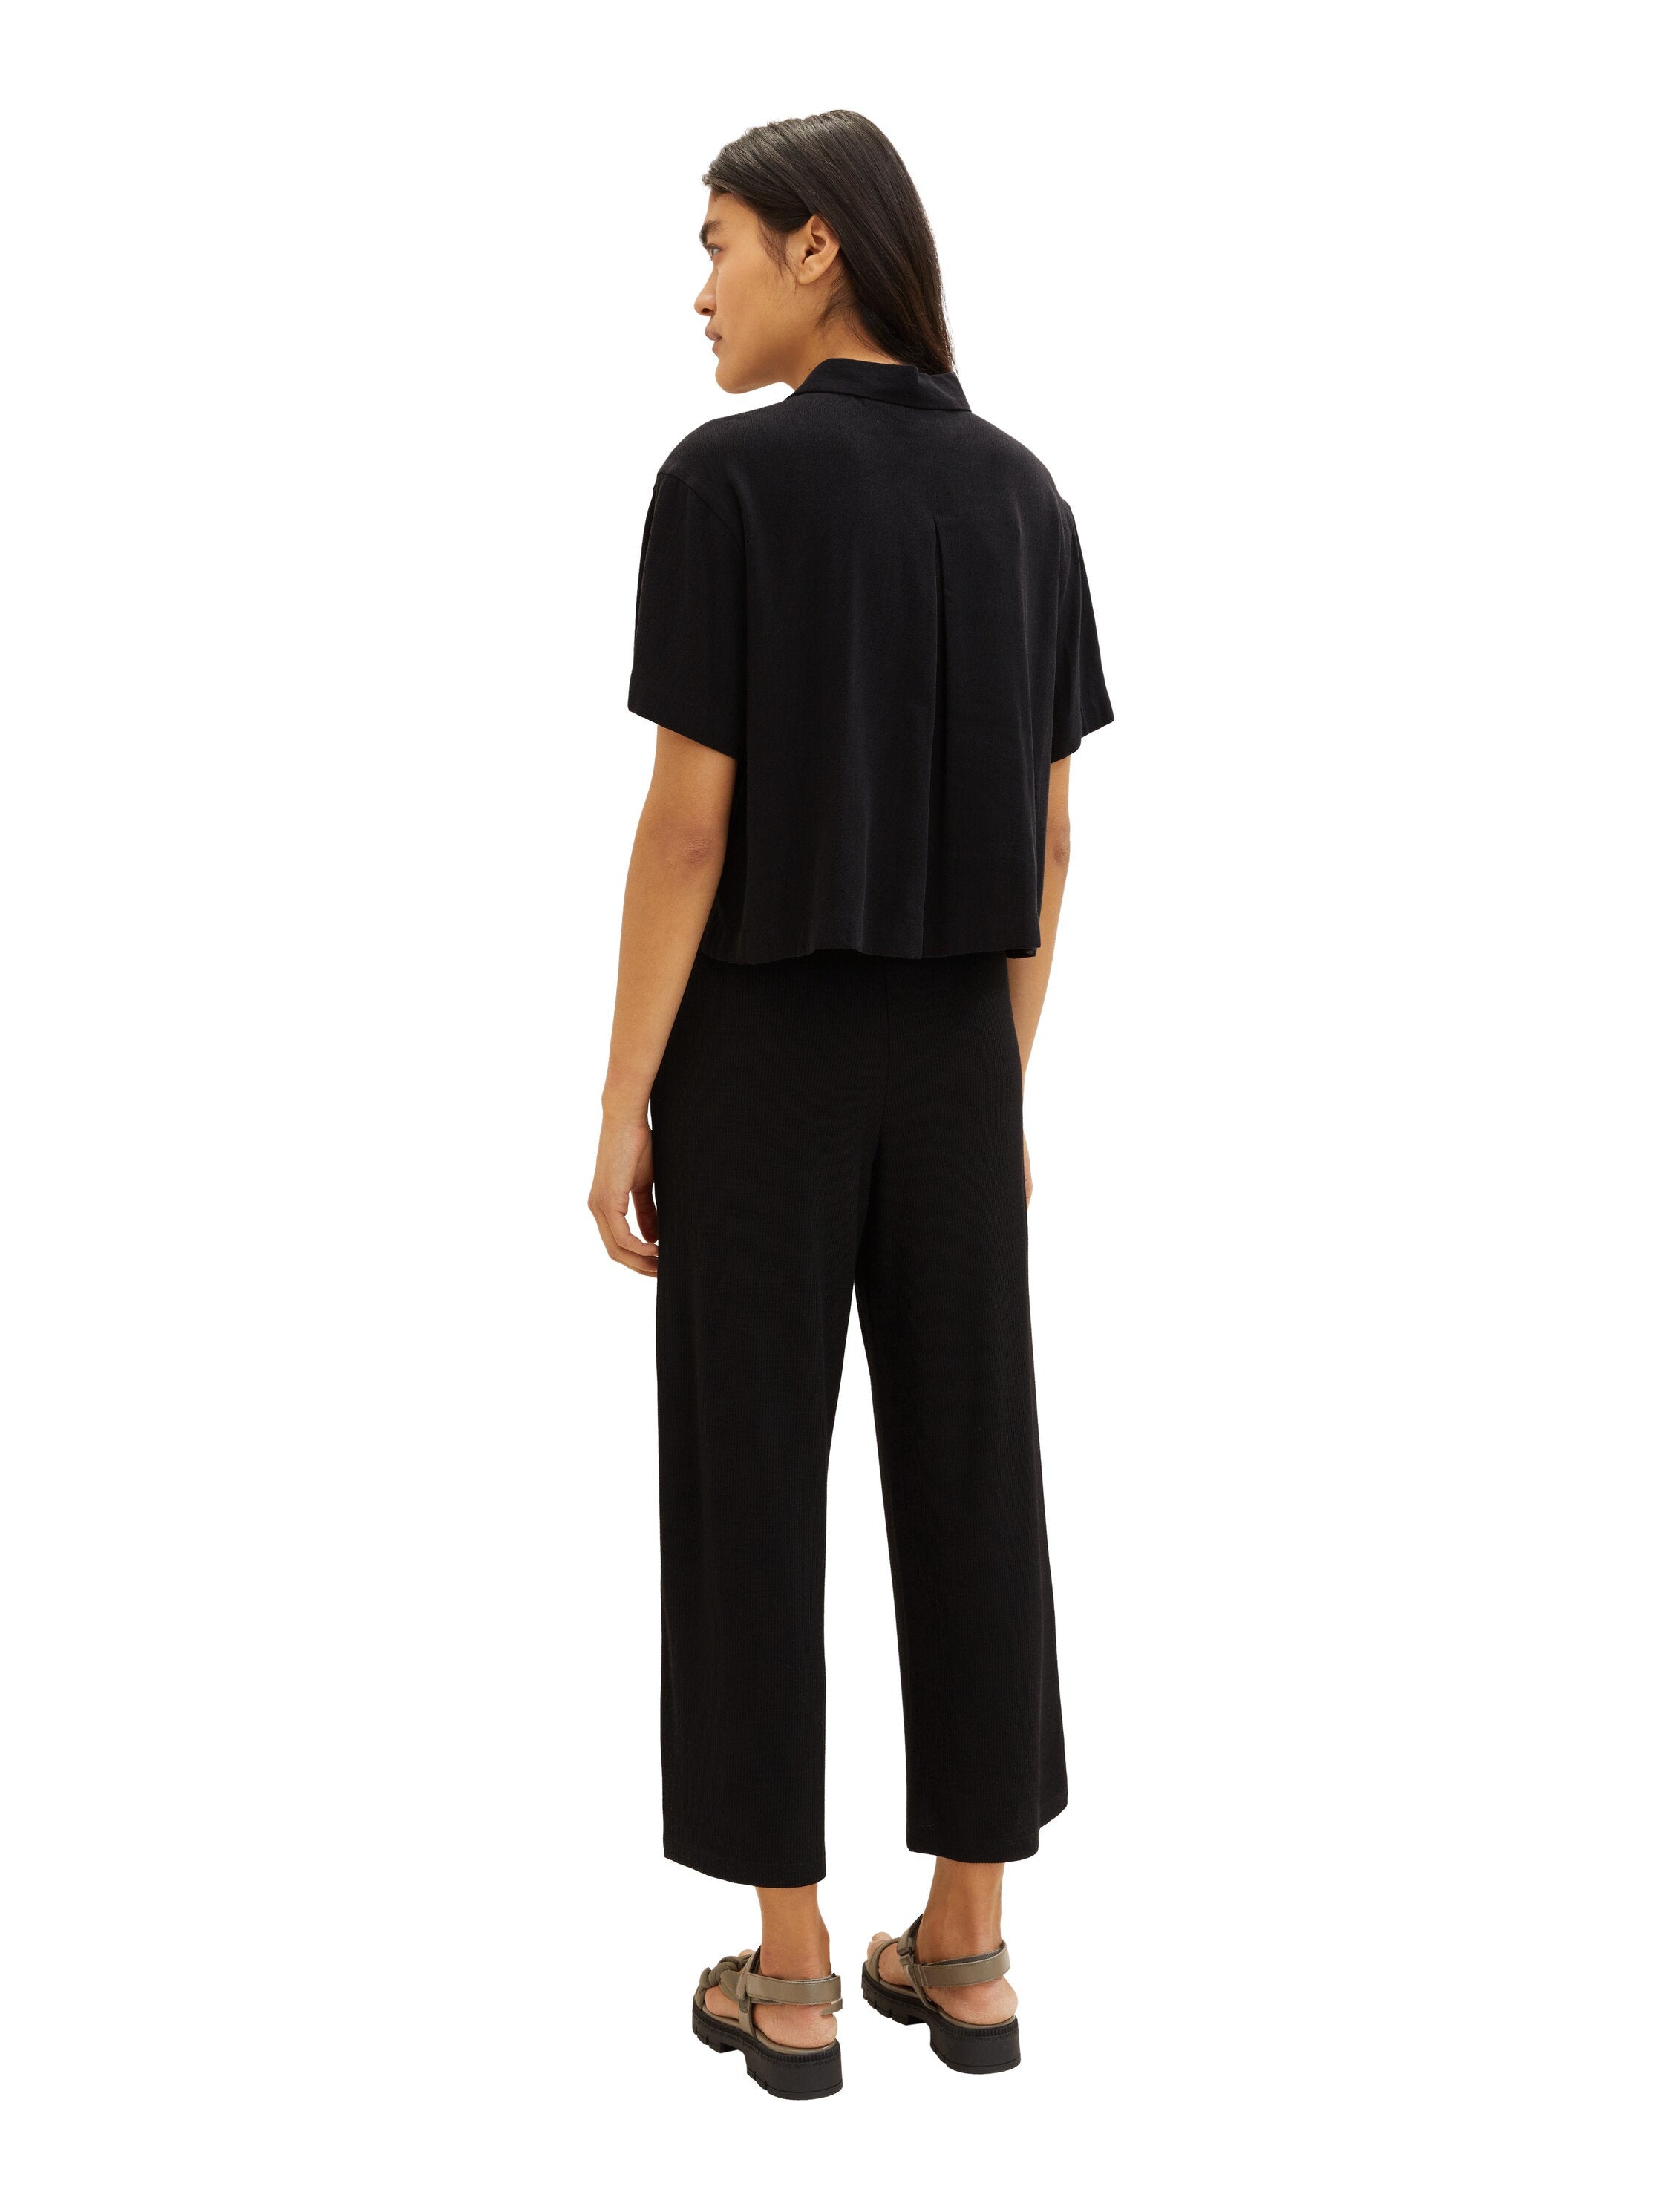 Cropped Slip On Trousers With Pockets_1038220_14482_05